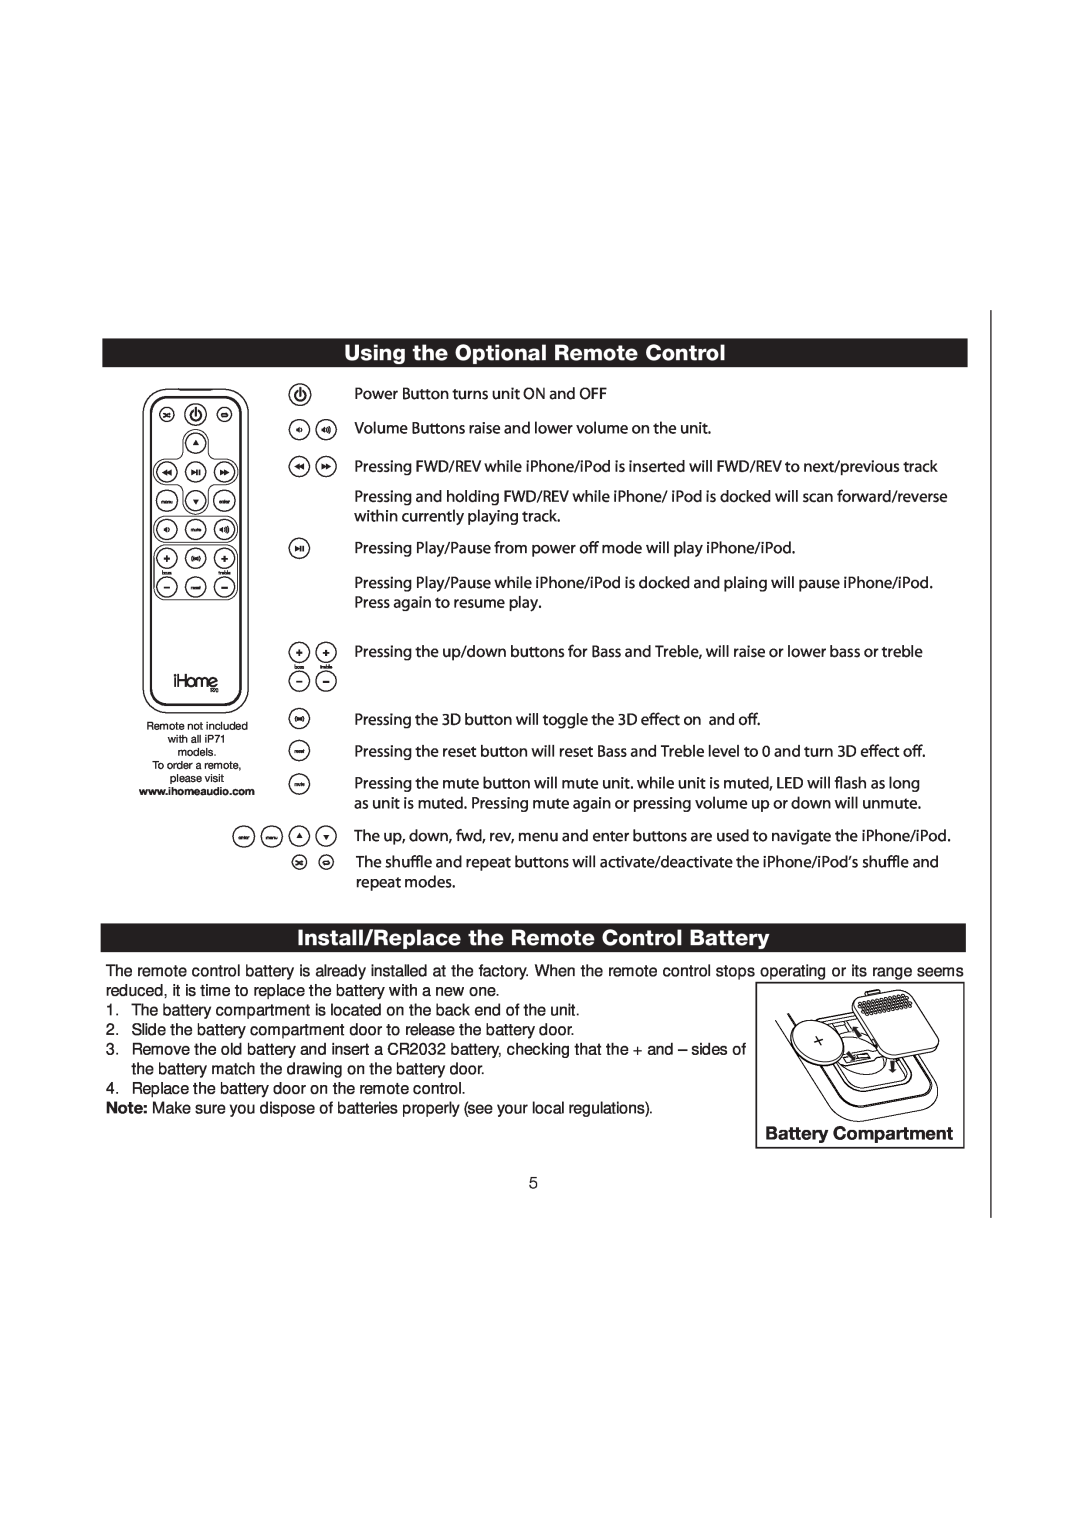 iHome iP71 manual Using the Optional Remote Control, Install/Replace the Remote Control Battery, Battery Compartment 